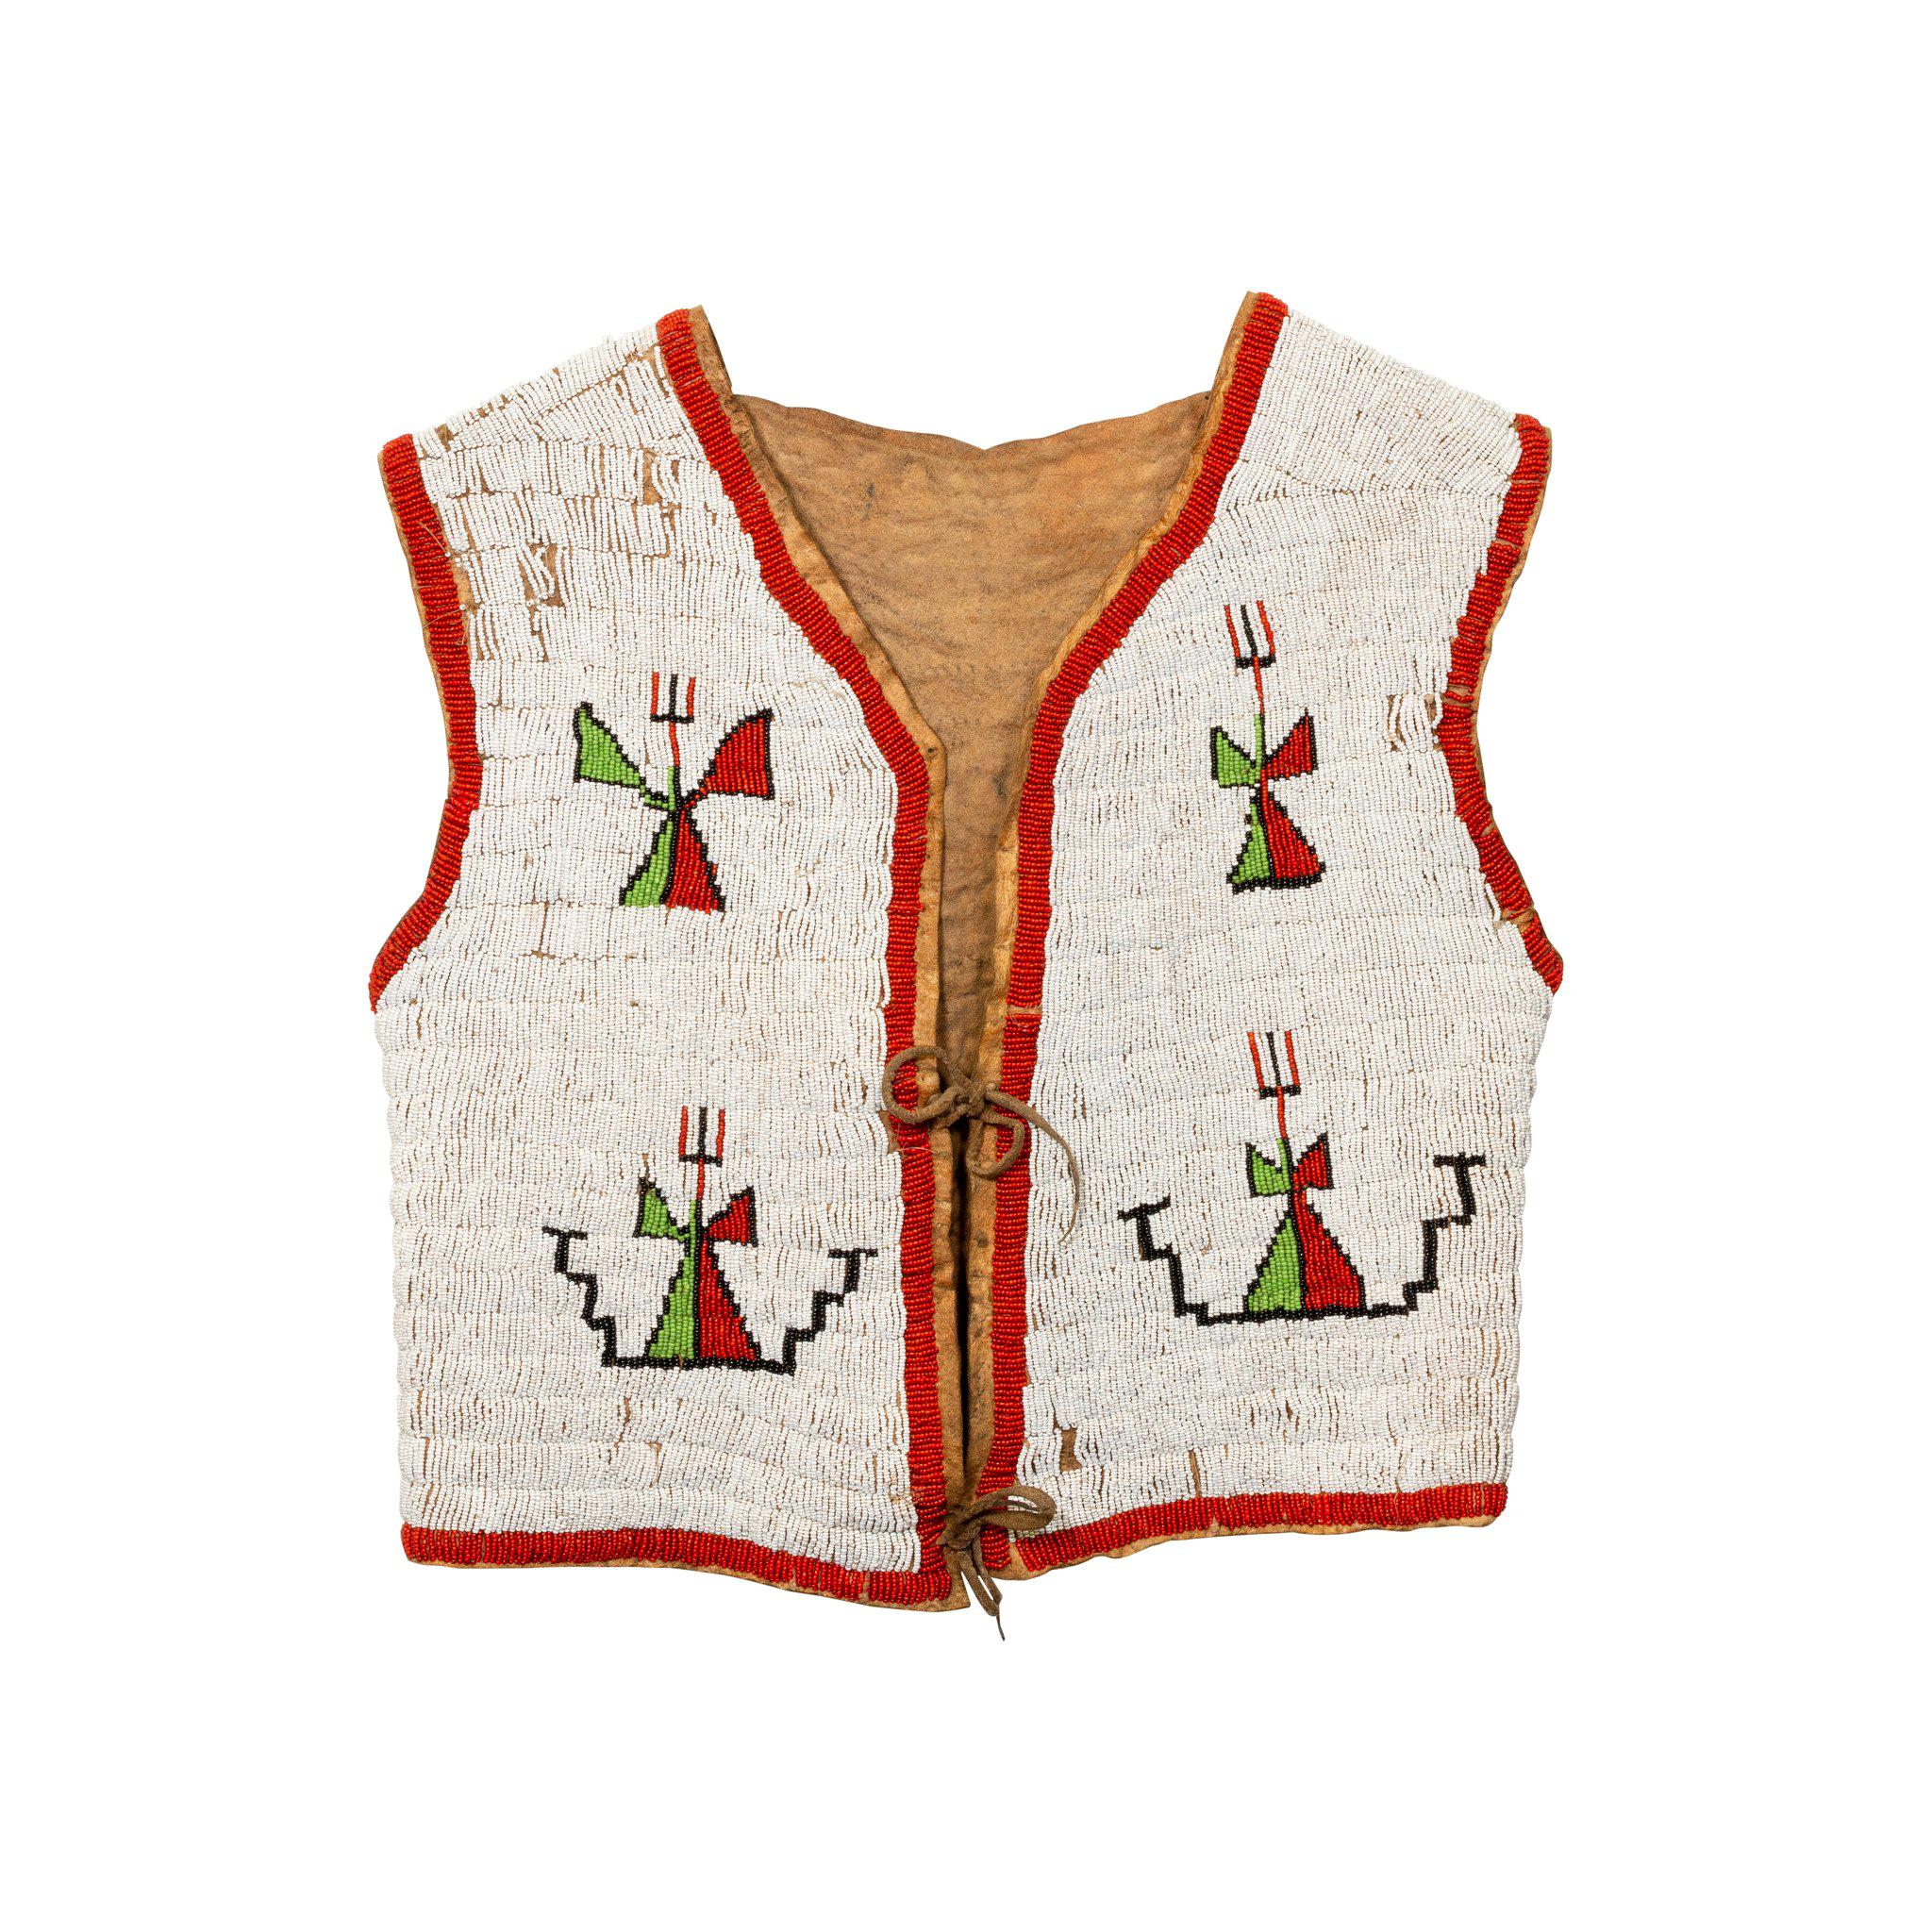 Chief White Feather "Dr. Teyet Ramar" Sioux Beaded Vest For Sale